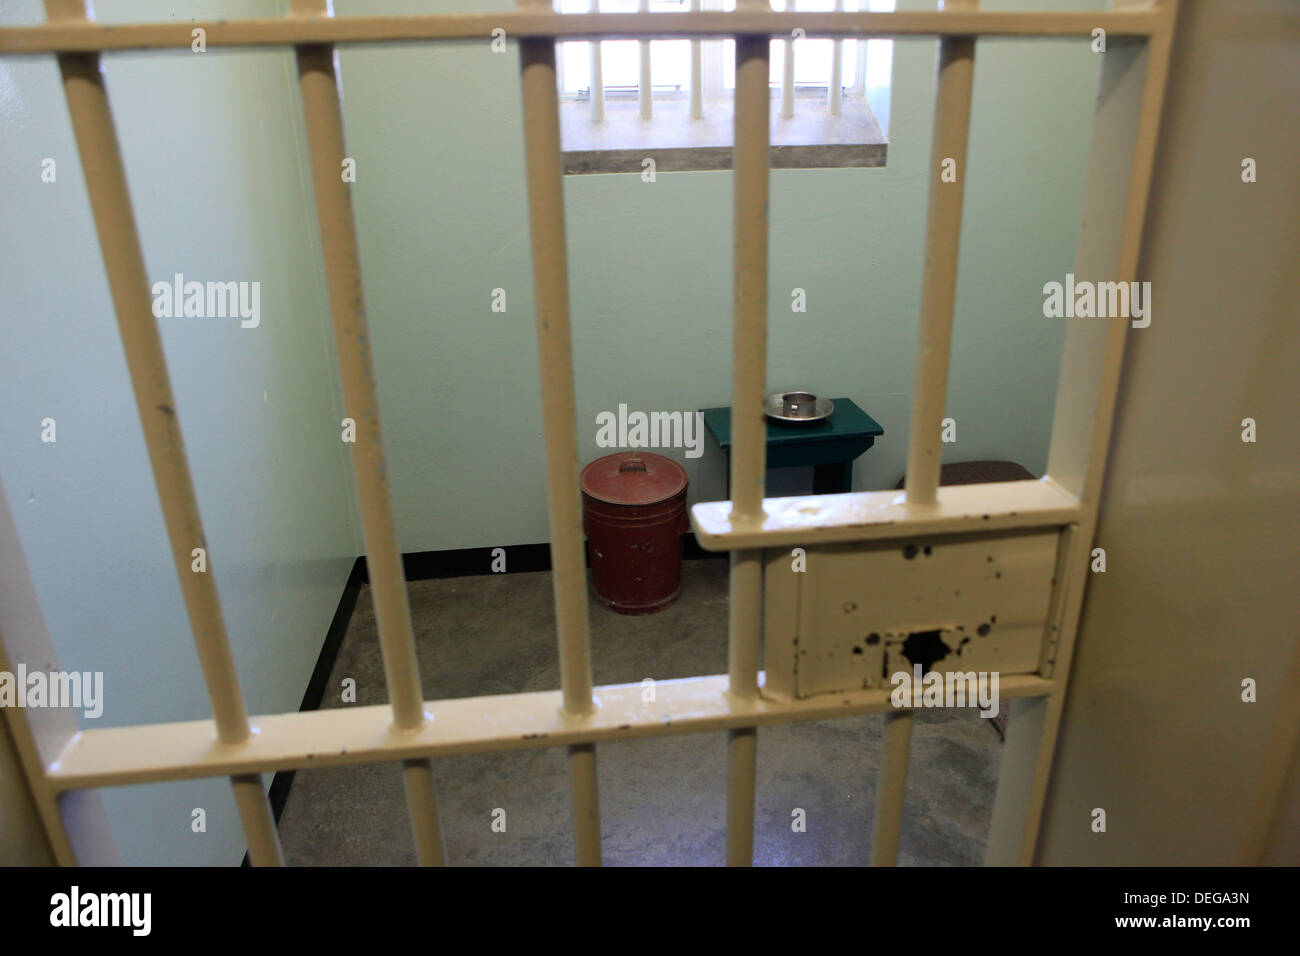 Nelson Mandela's cell on Robben Island, where he was held prisoner, near Cape Town, South Africa. Stock Photo